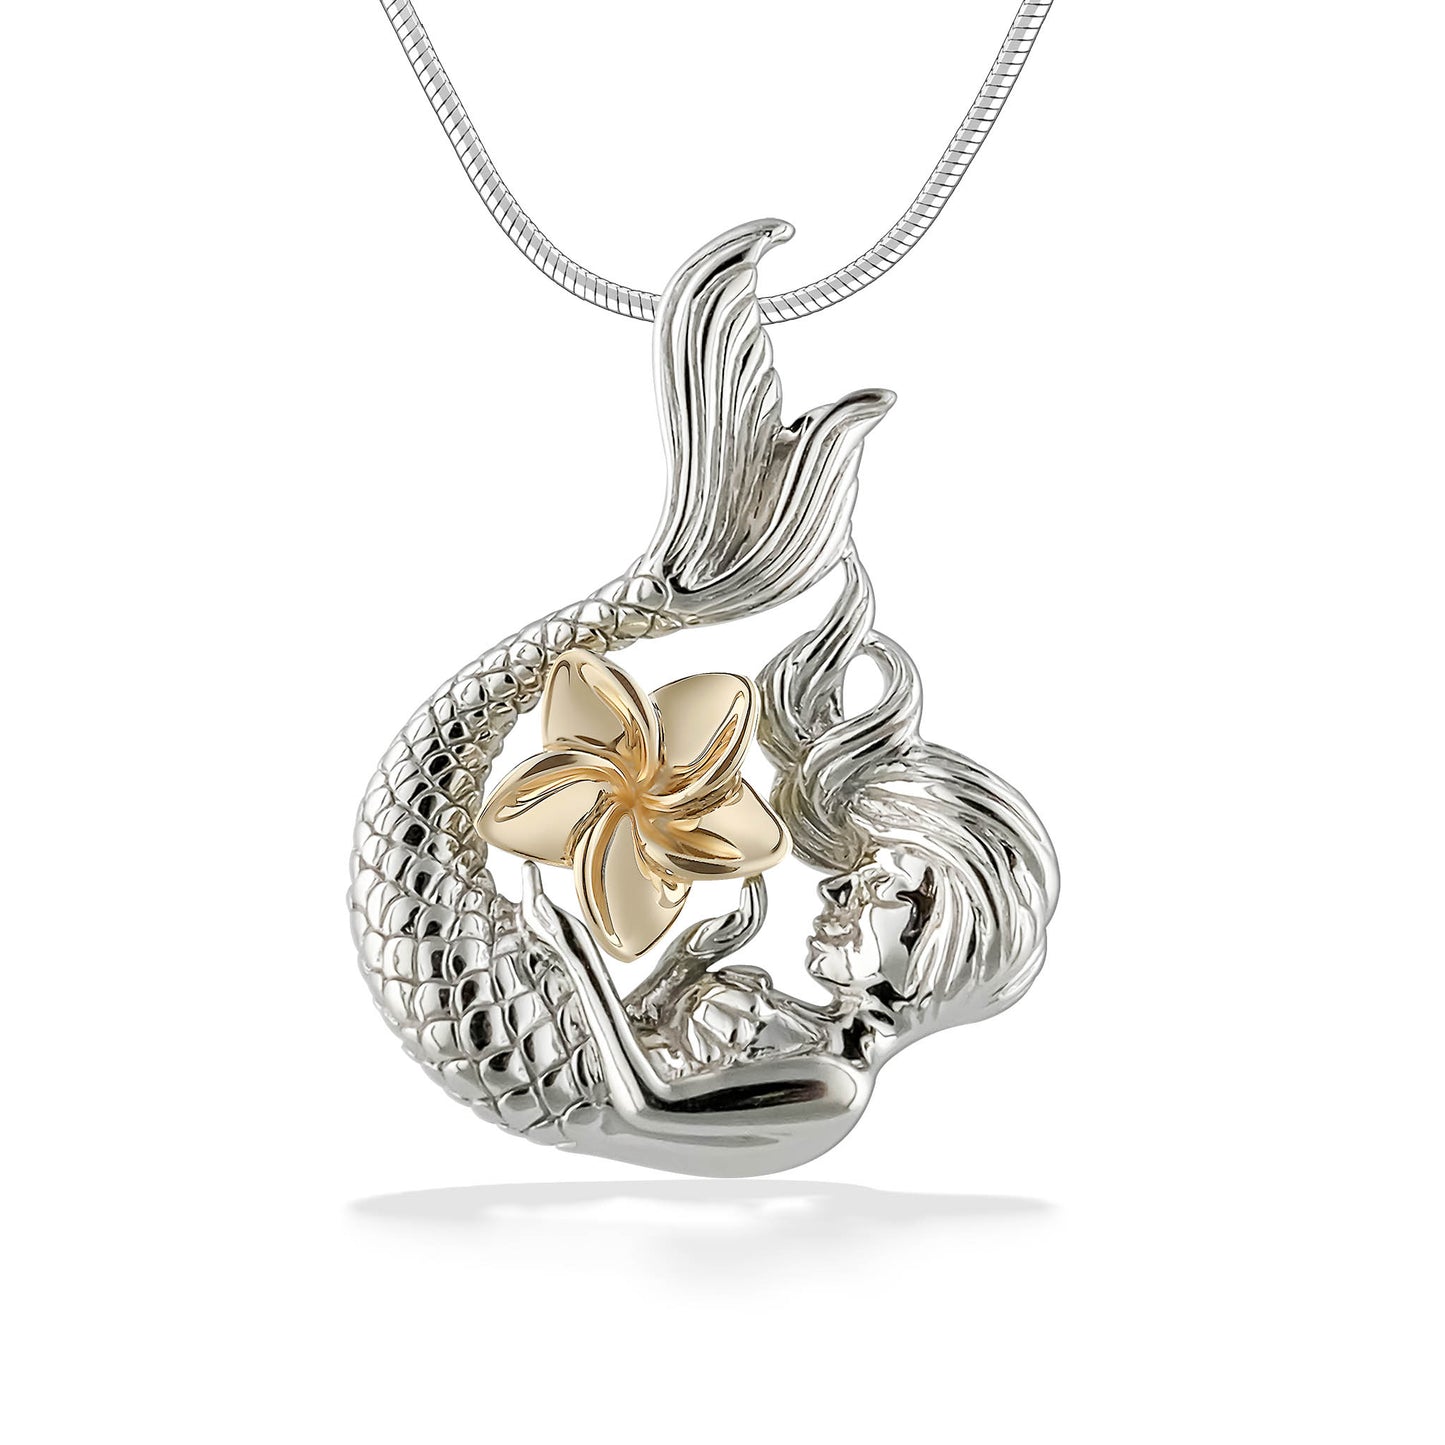 44473 - 14K Yellow Gold and Sterling Silver - Mermaid Pendant 